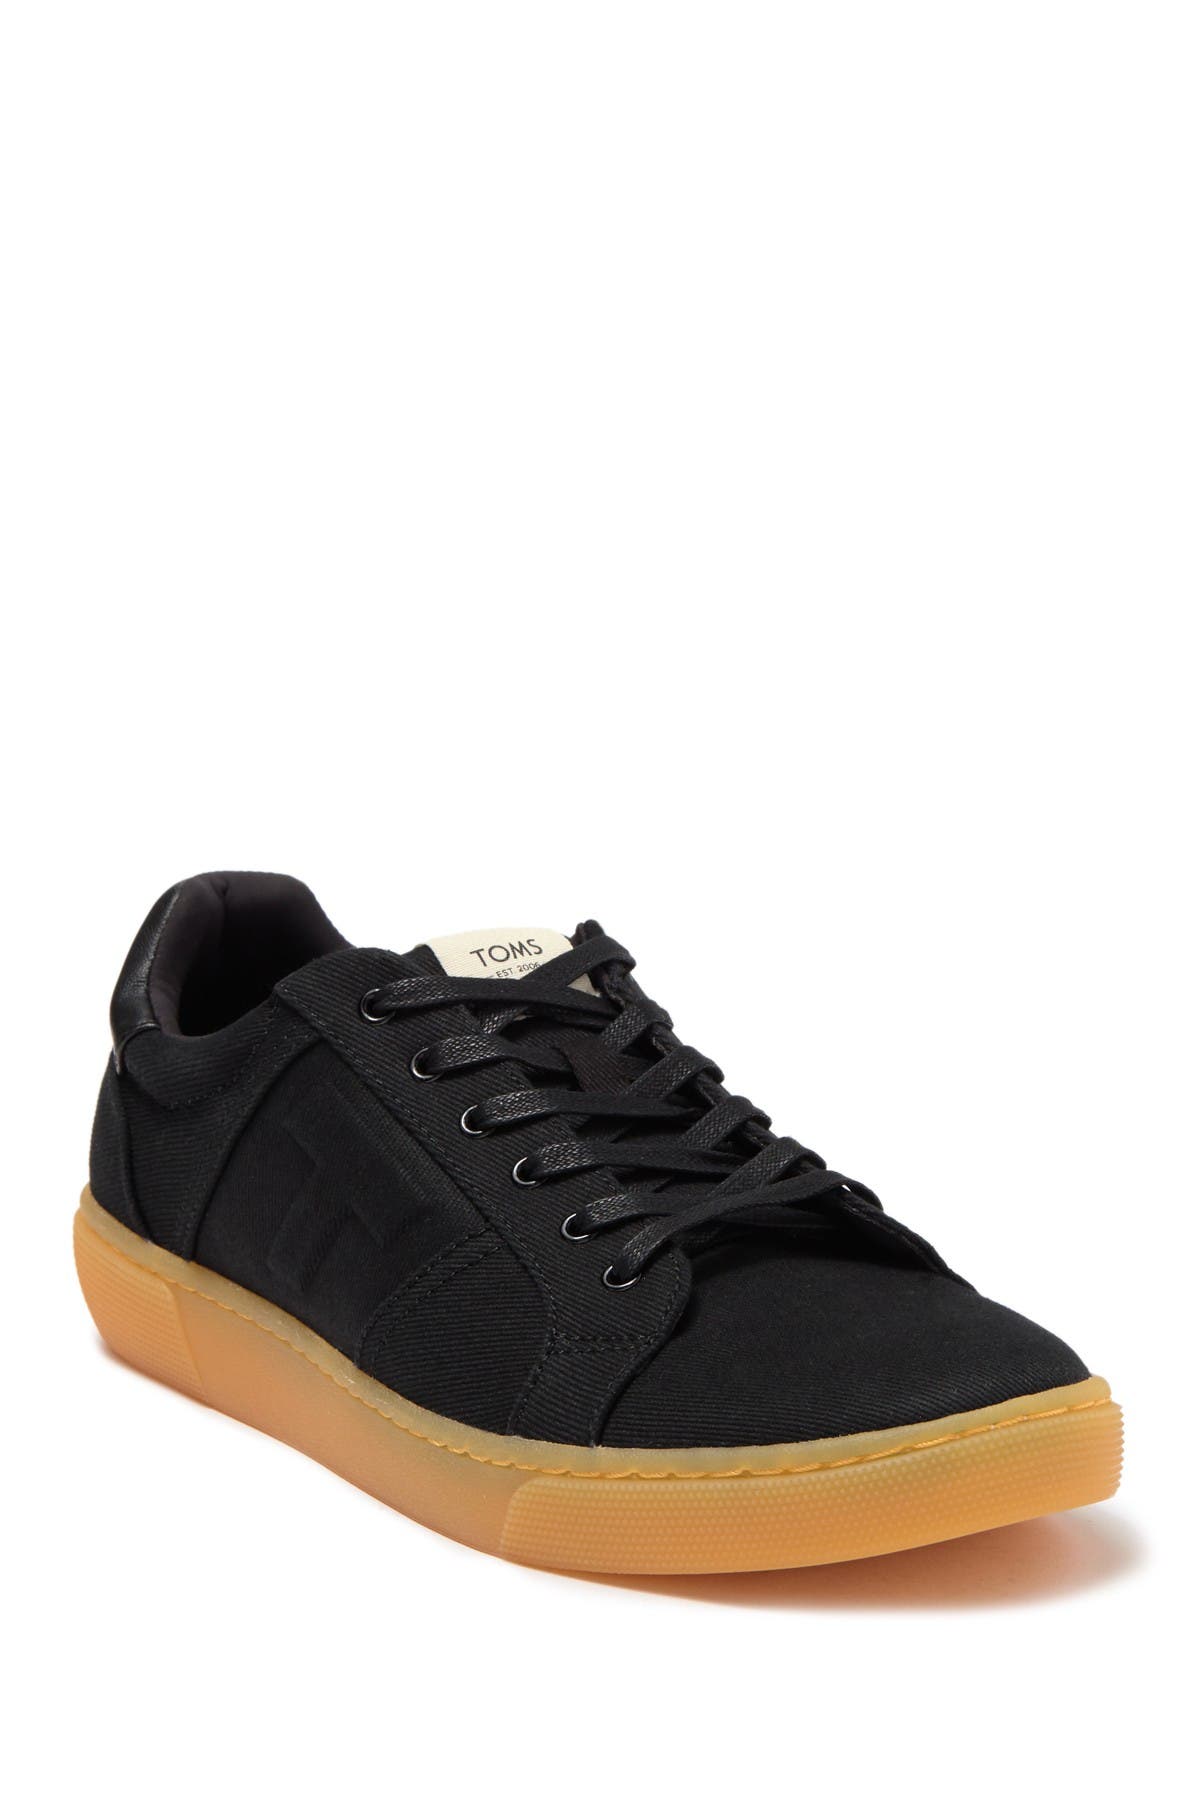 toms leandro sneakers